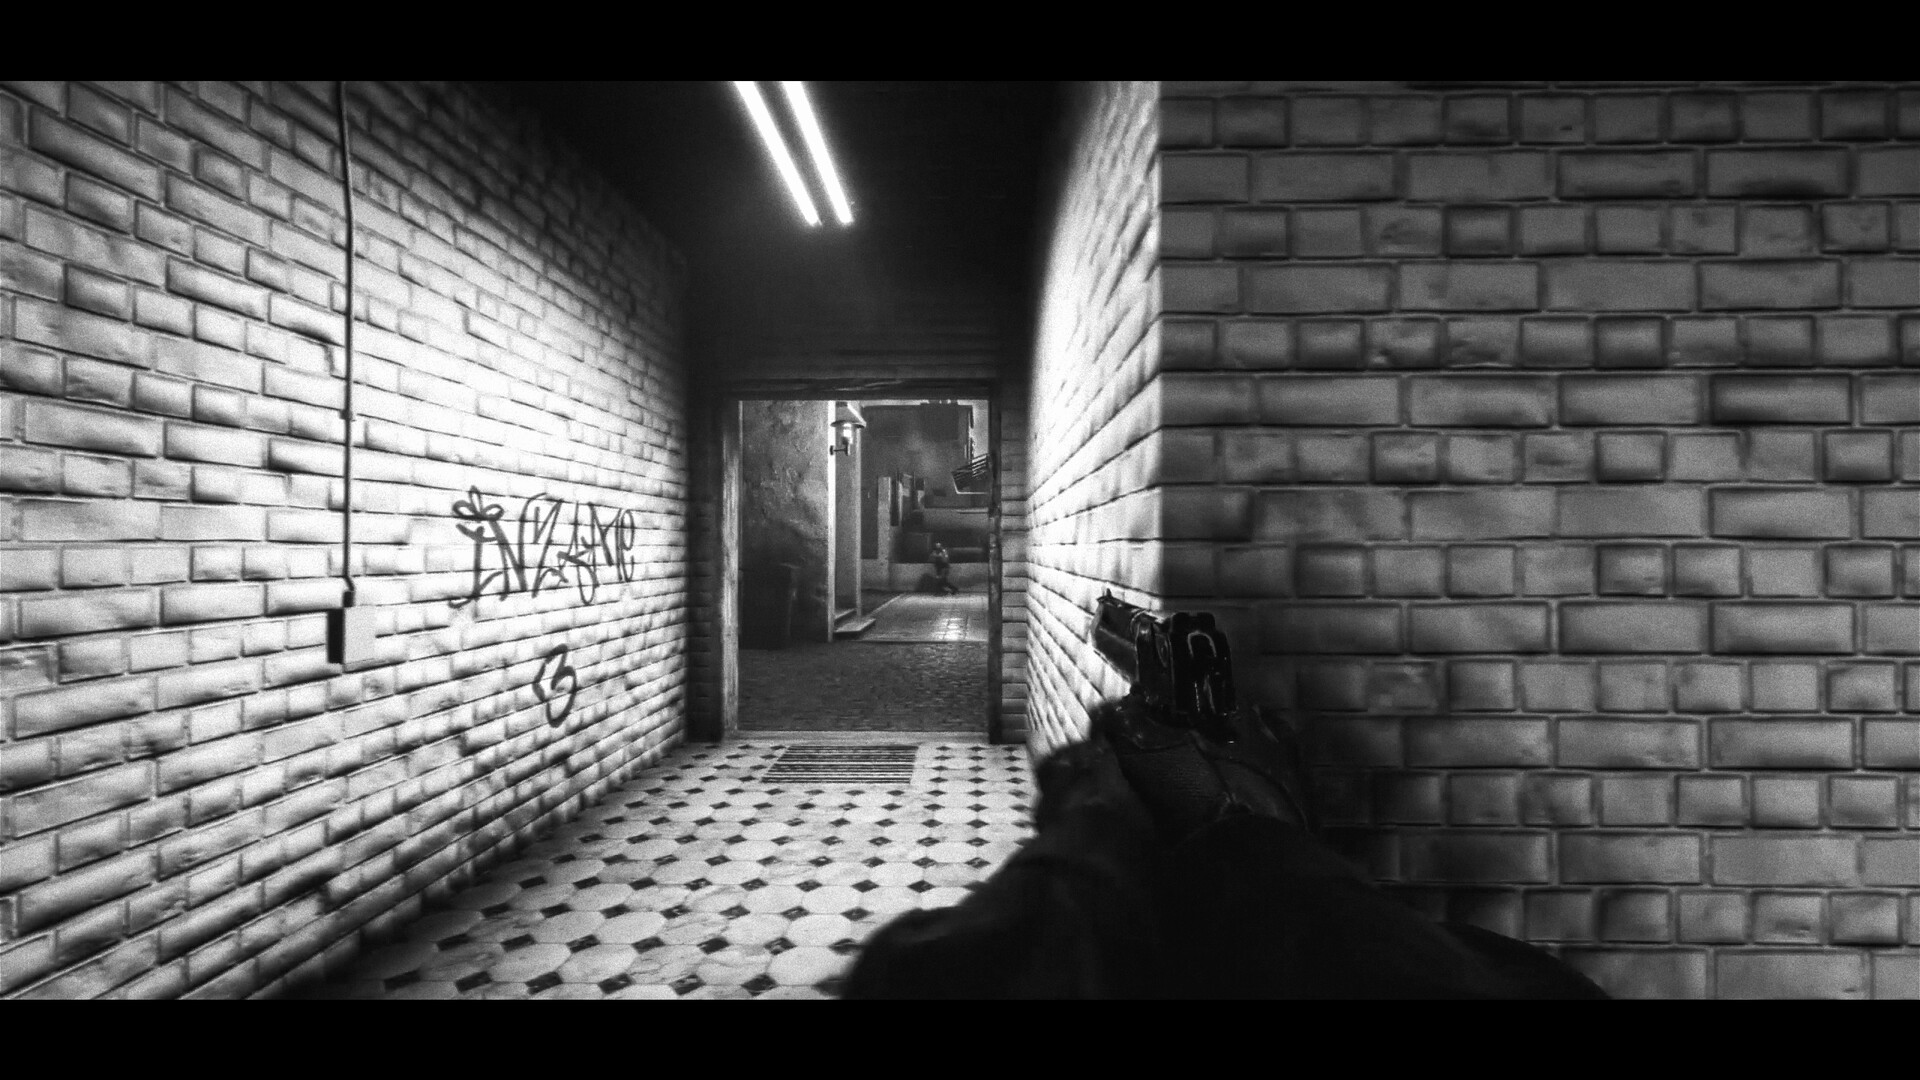 Counter Strike Global Offensive Counter Strike Global Offensive Map PC Gaming Screen Shot Monochrome 1920x1080